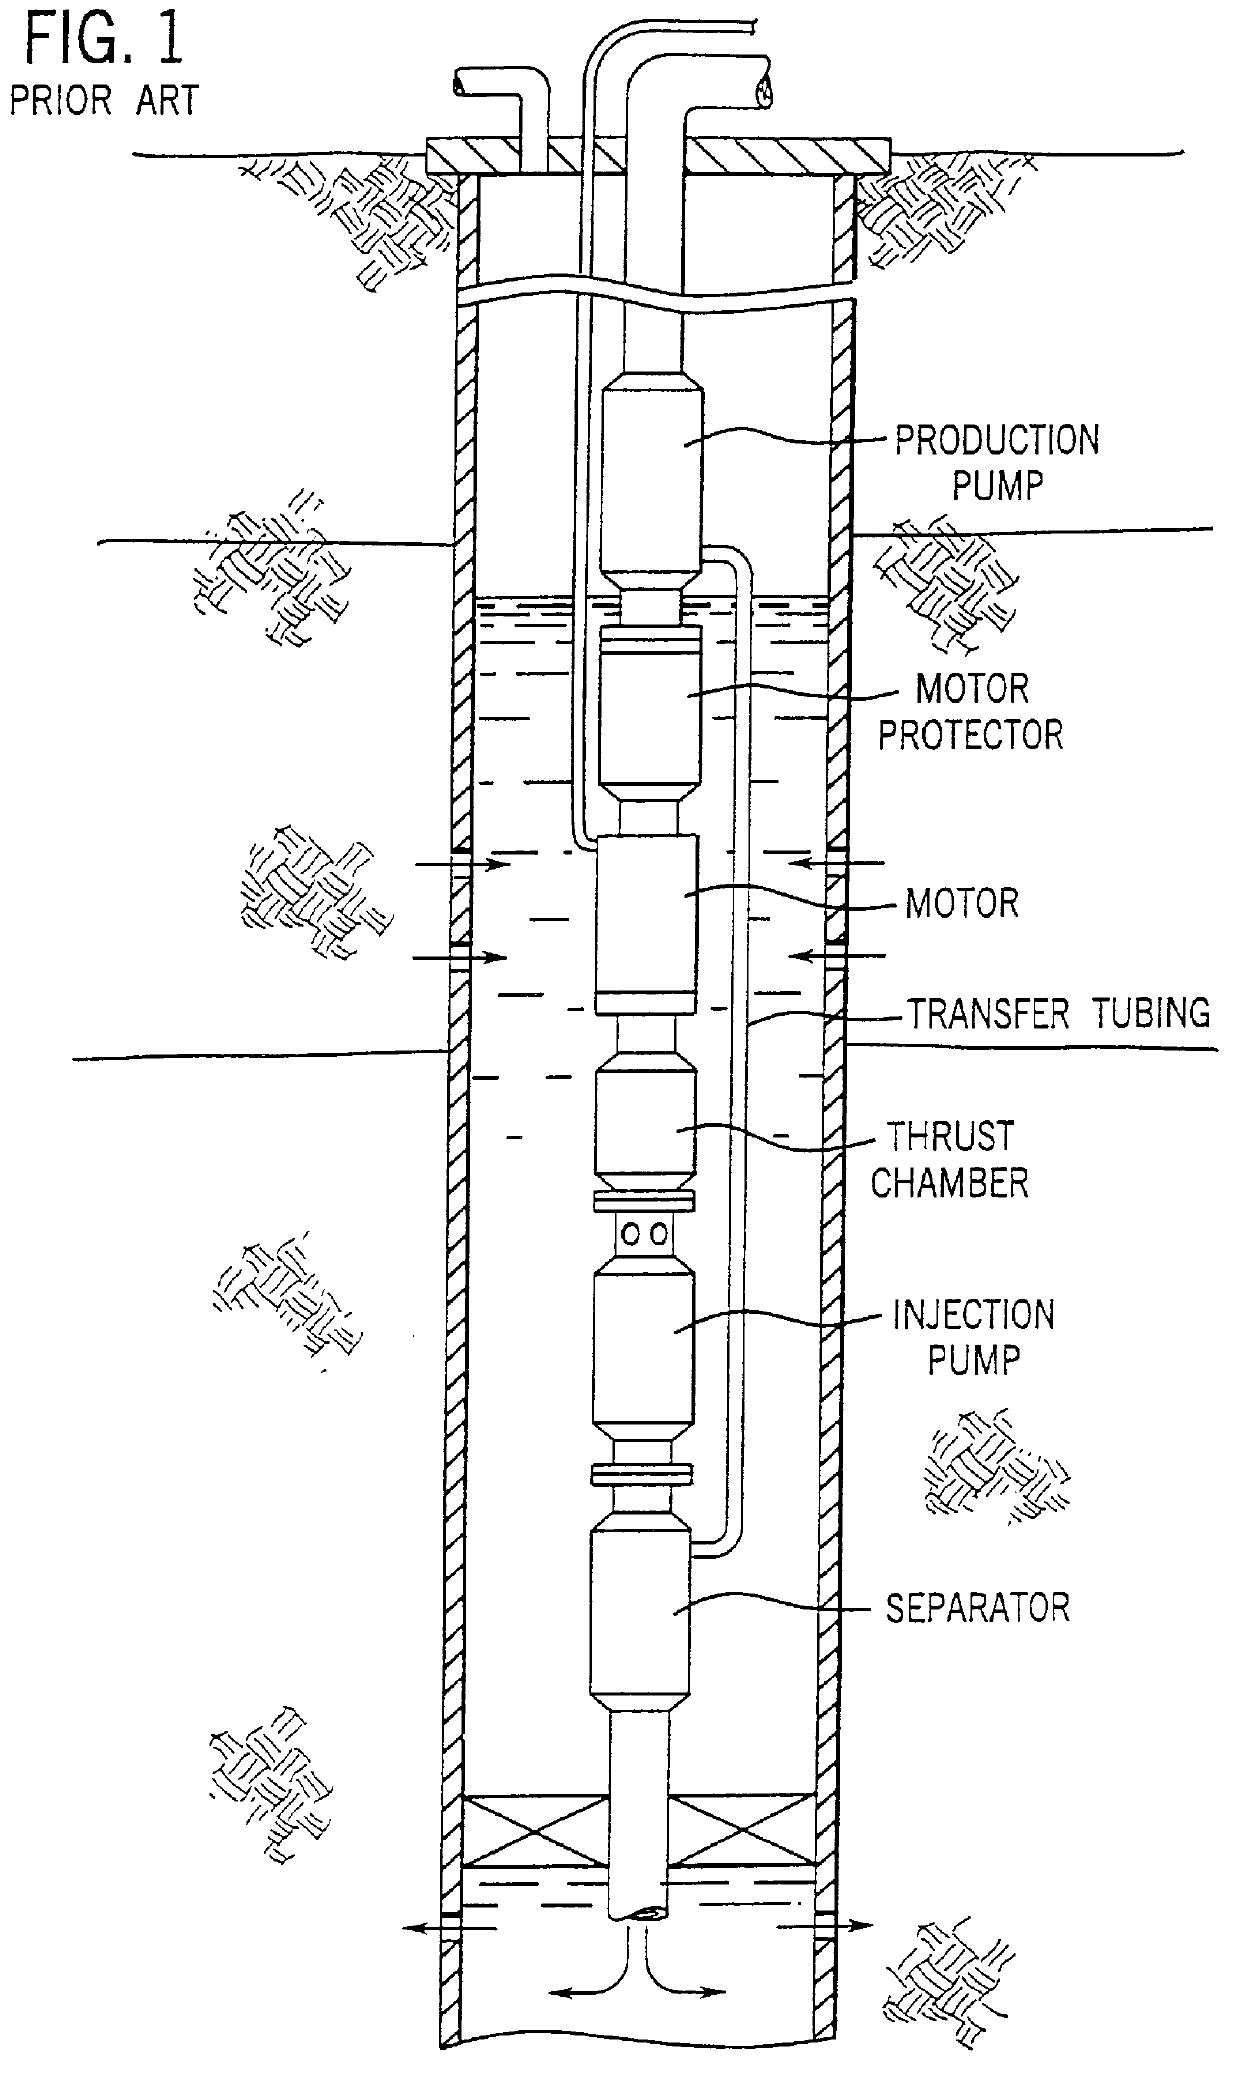 Adjustable shroud for a submergible pumping system and pumping system incorporating same